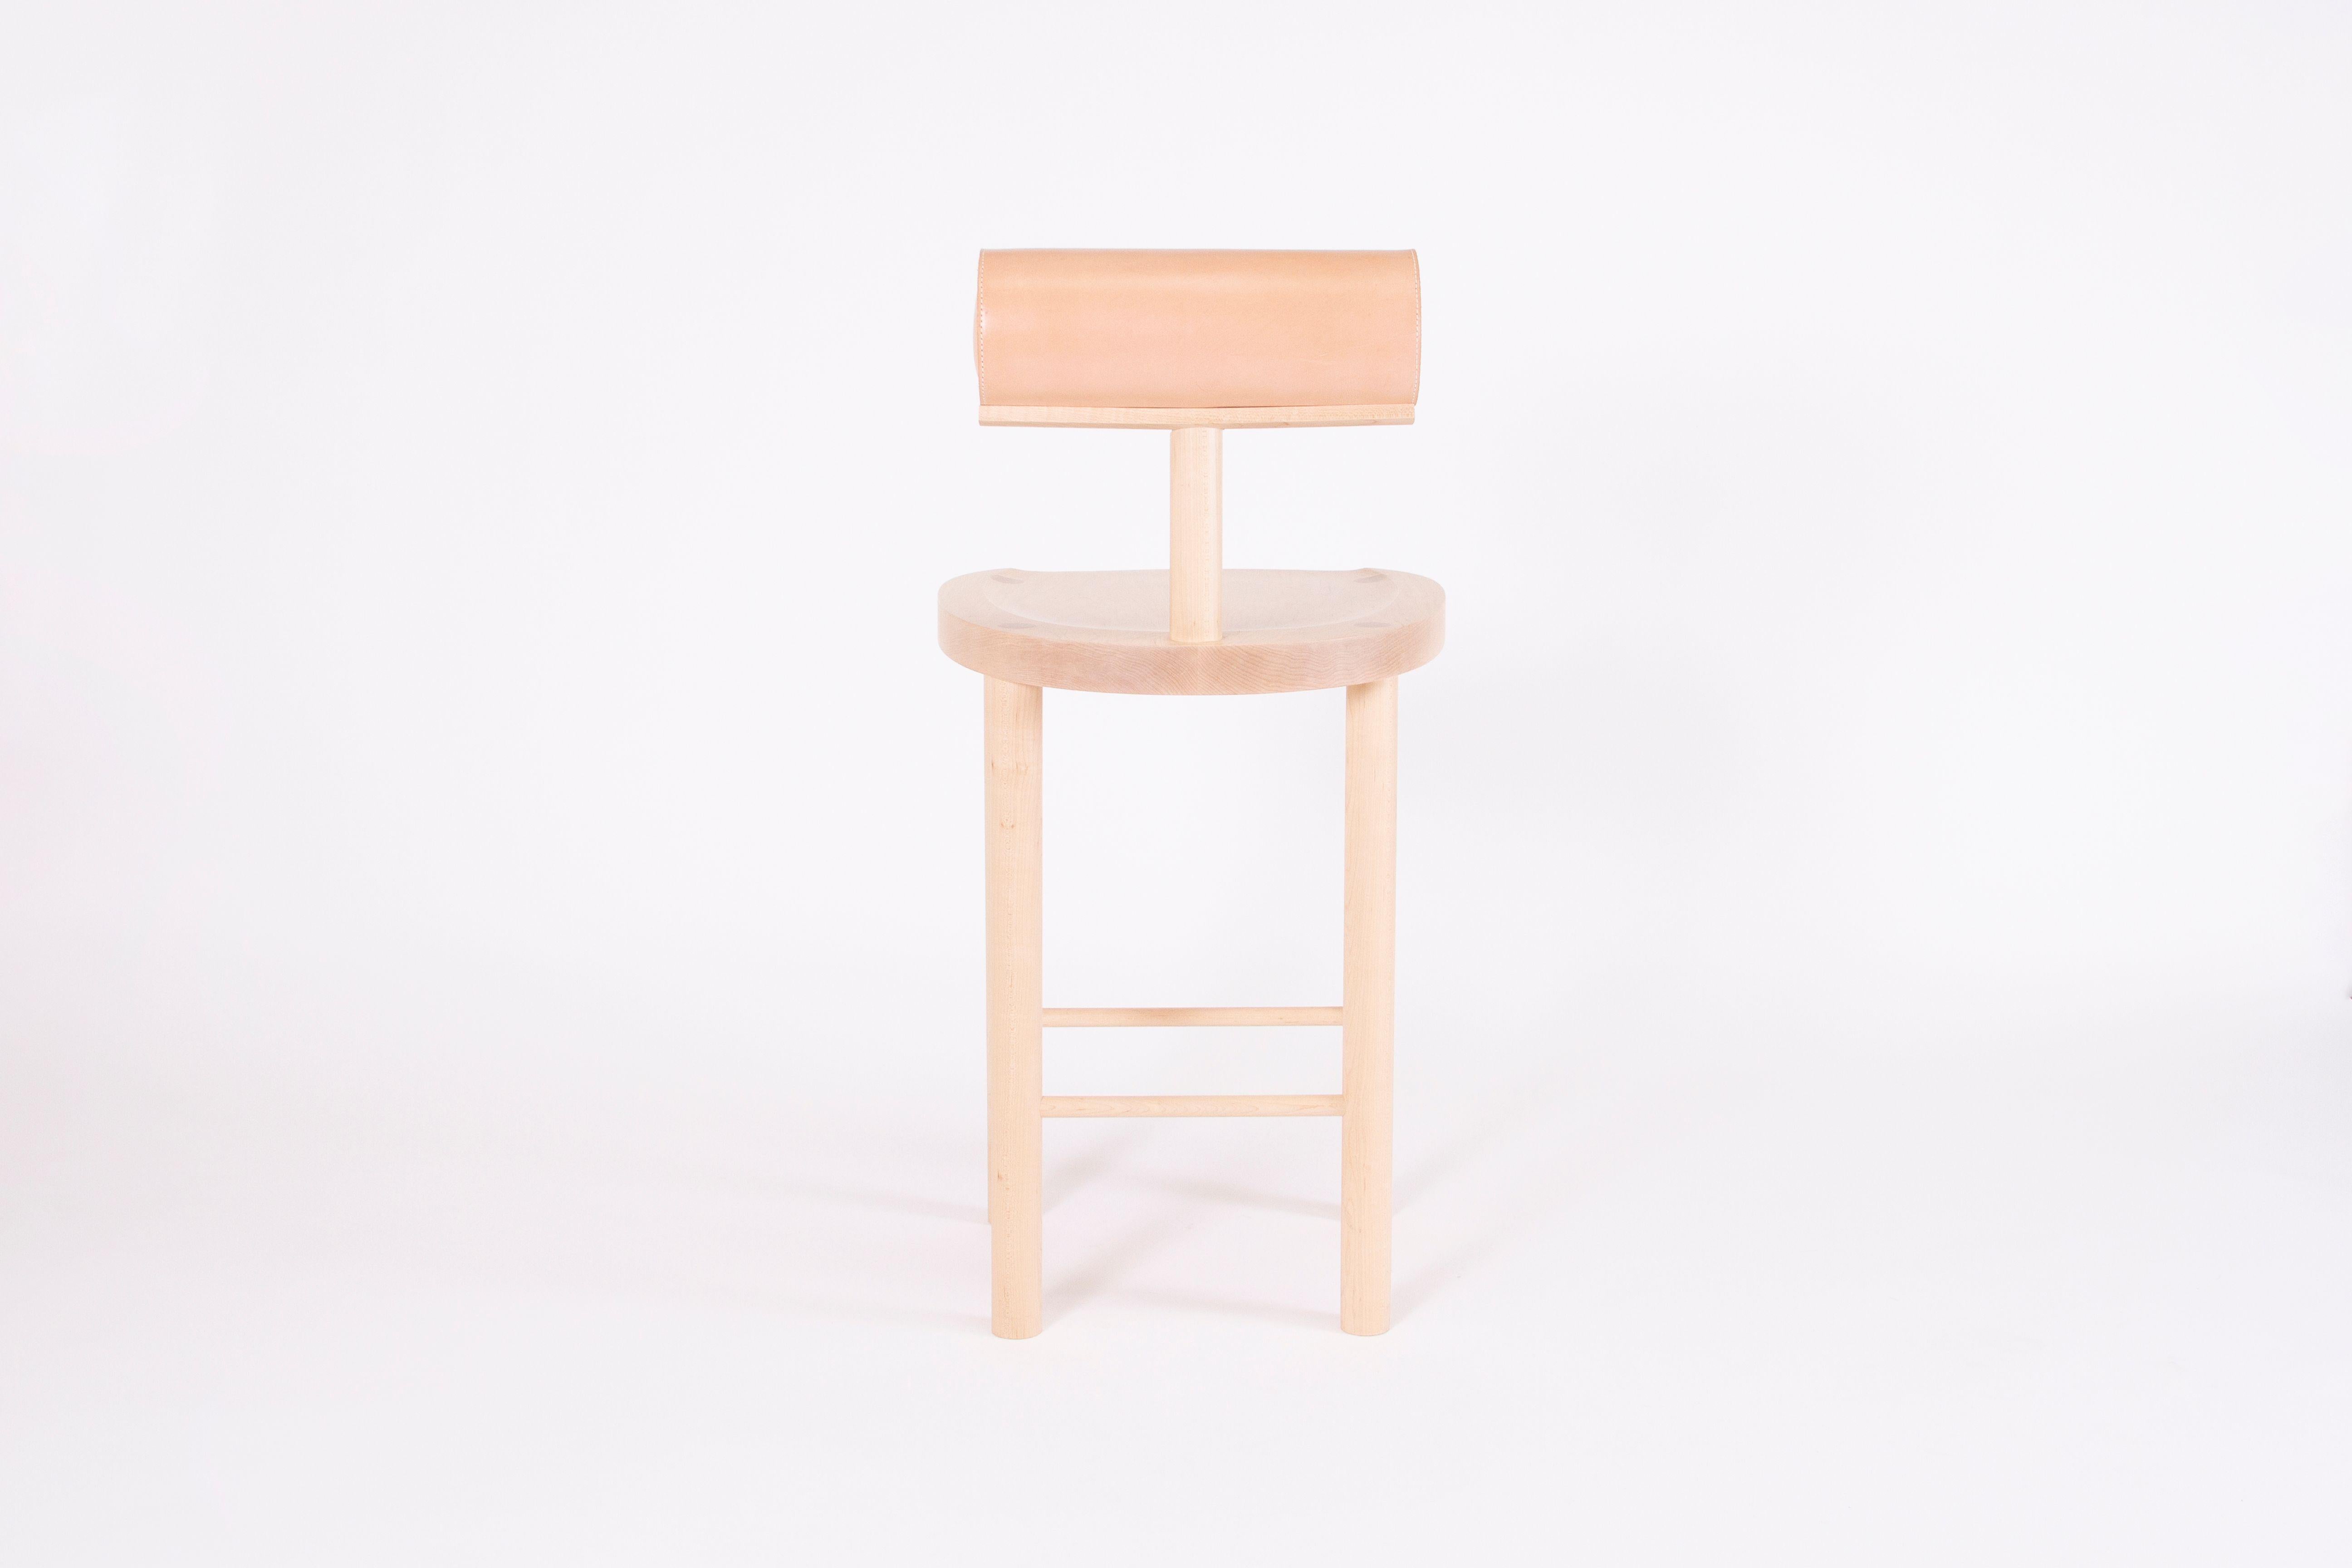 Una counter stool by Estudio Persona
Dimensions: W 45.8 x D 48.3 x H 94 cm
Materials: Solid maple, natural vegetable leather

Solid maple, upholstered back bolster in natural vegetable leather.
Also available in black stained ash or